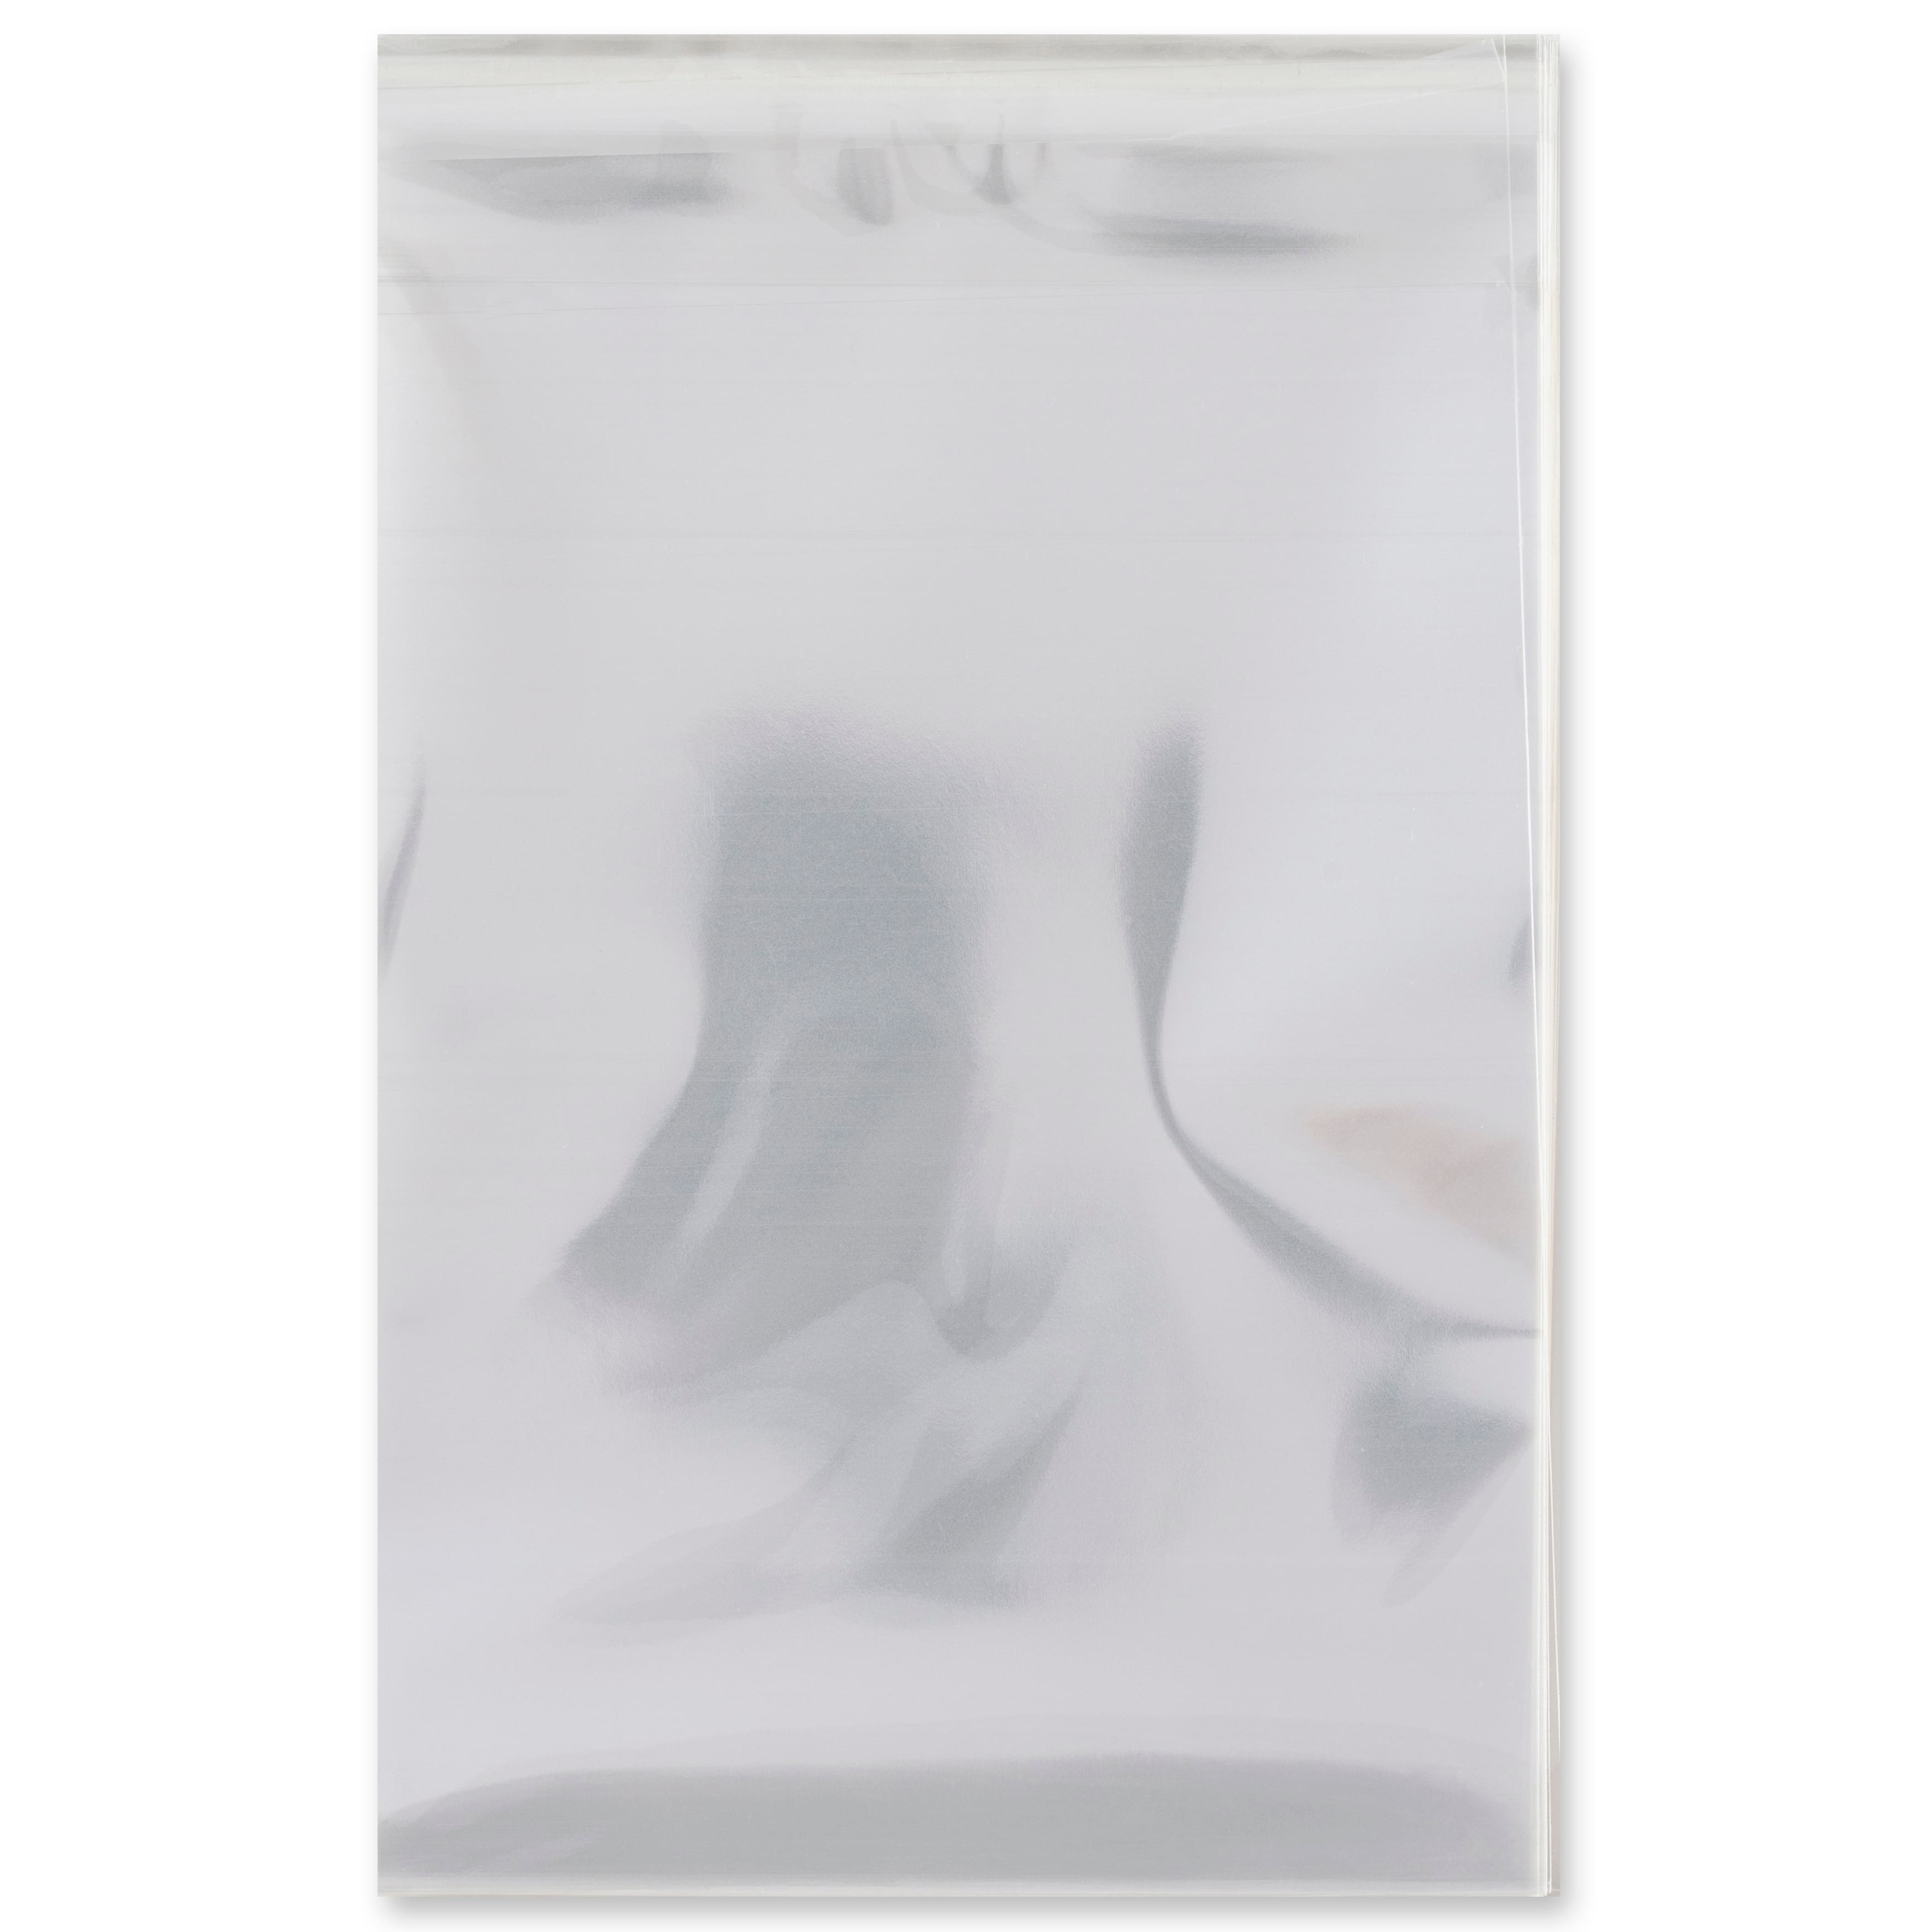 Card Sleeves 5x7 10pc Clear